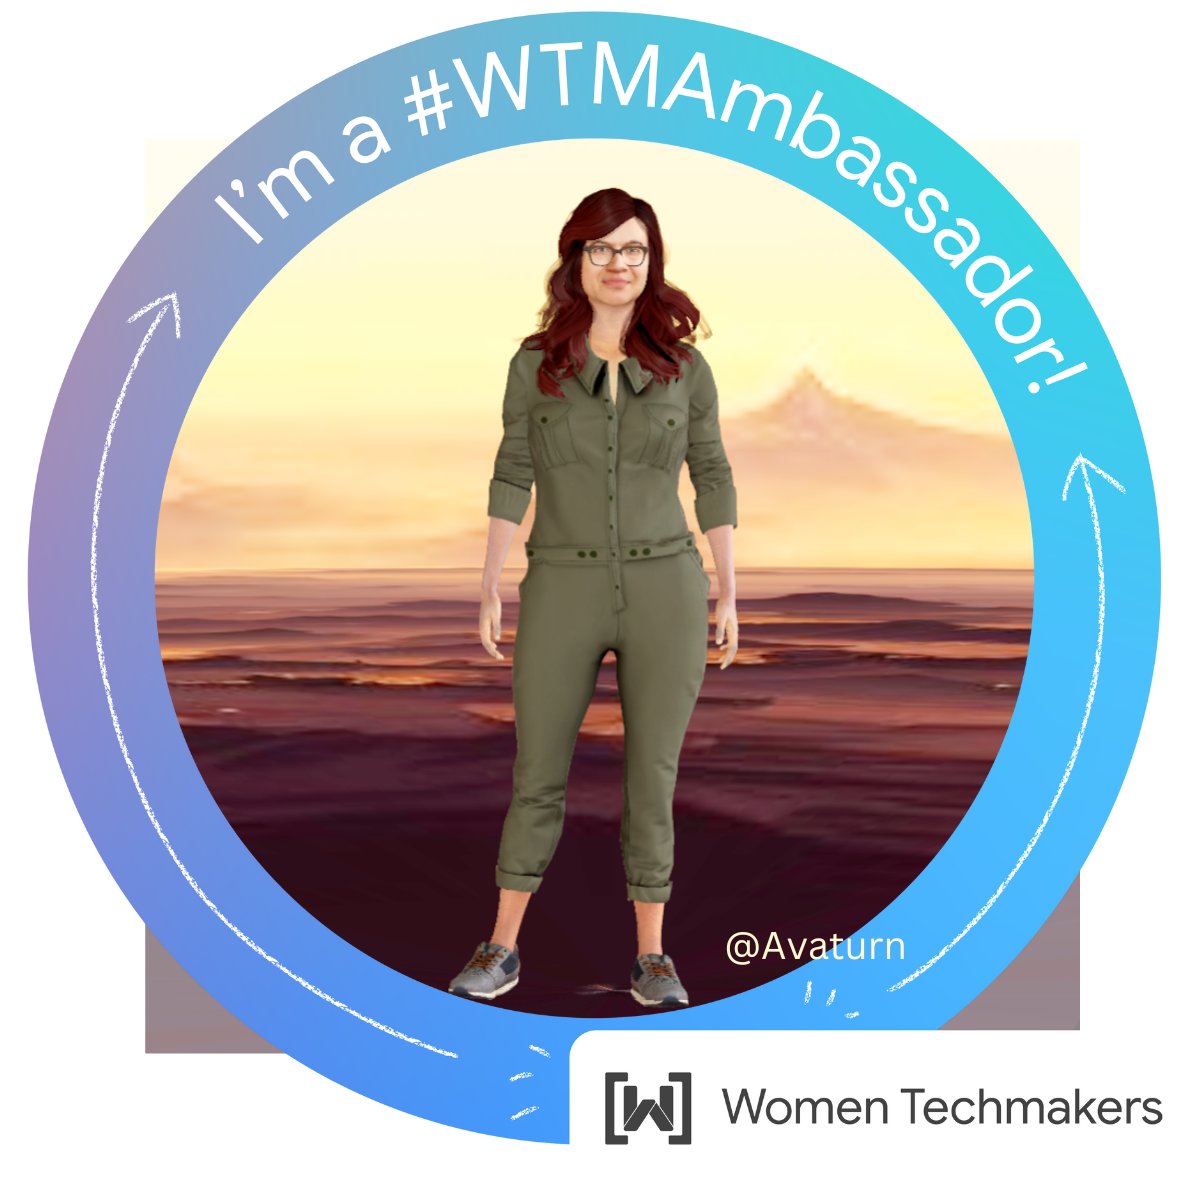 Hi all, happy to share that I am now an Ambassador at the Global Women Techmakers Program, supported by Google- both a privelege and a responsibility! Connect with me for talks/deliberations on Tech at your Organisation! #cyberstreelogs #WomenTechmaker #TechEmpowerment #avatar